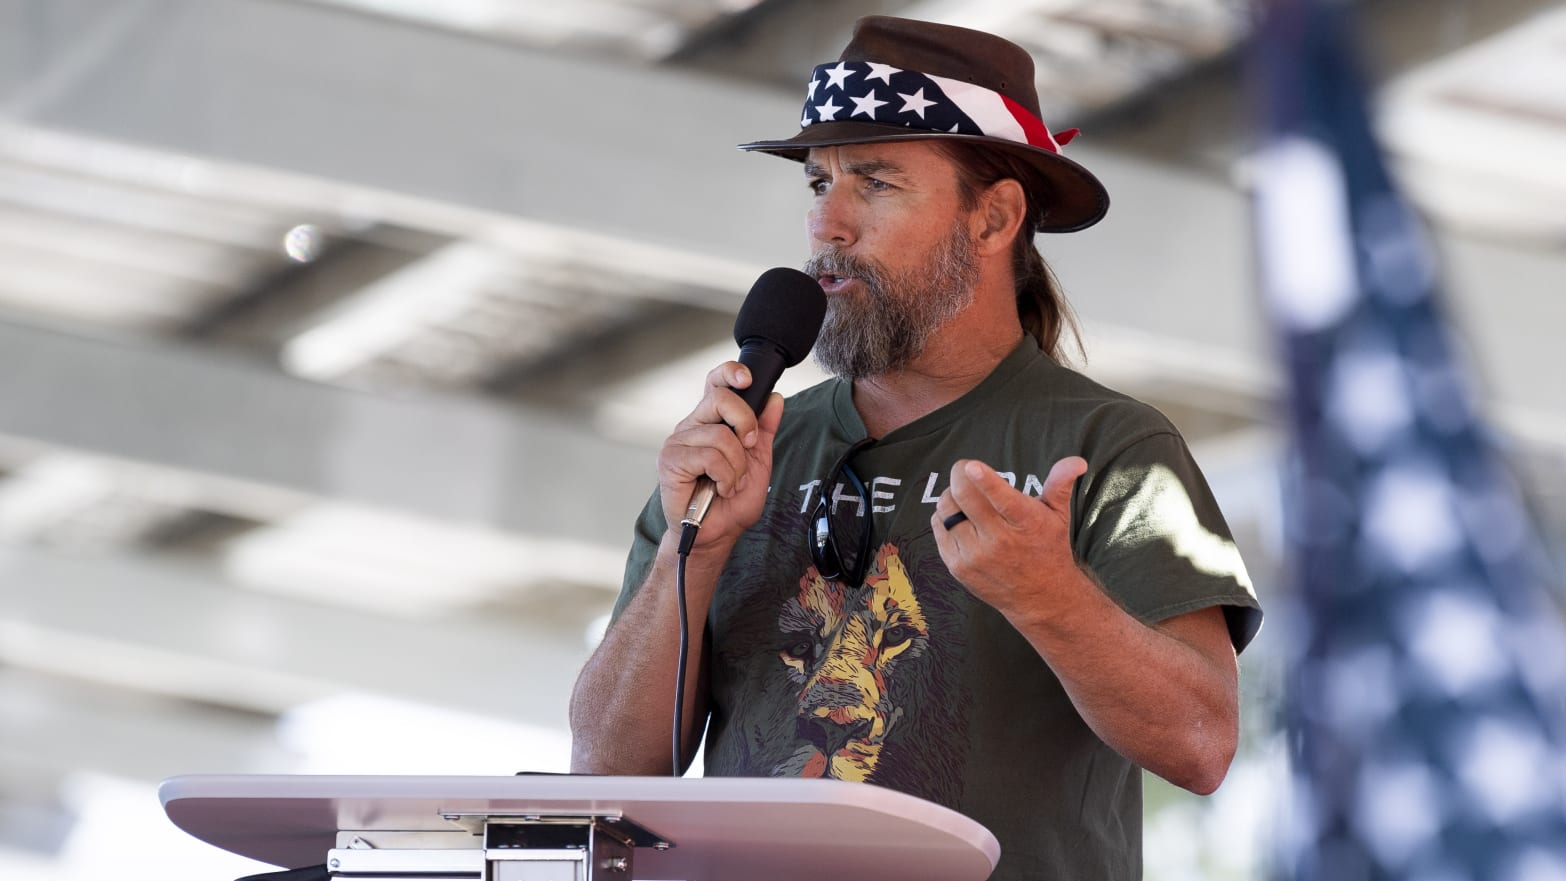 Alan Hostetter speaks during a pro-Trump election integrity rally he organized at the Orange County Registrar of Voters offices in Santa Ana, CA on Nov. 9, 2020.